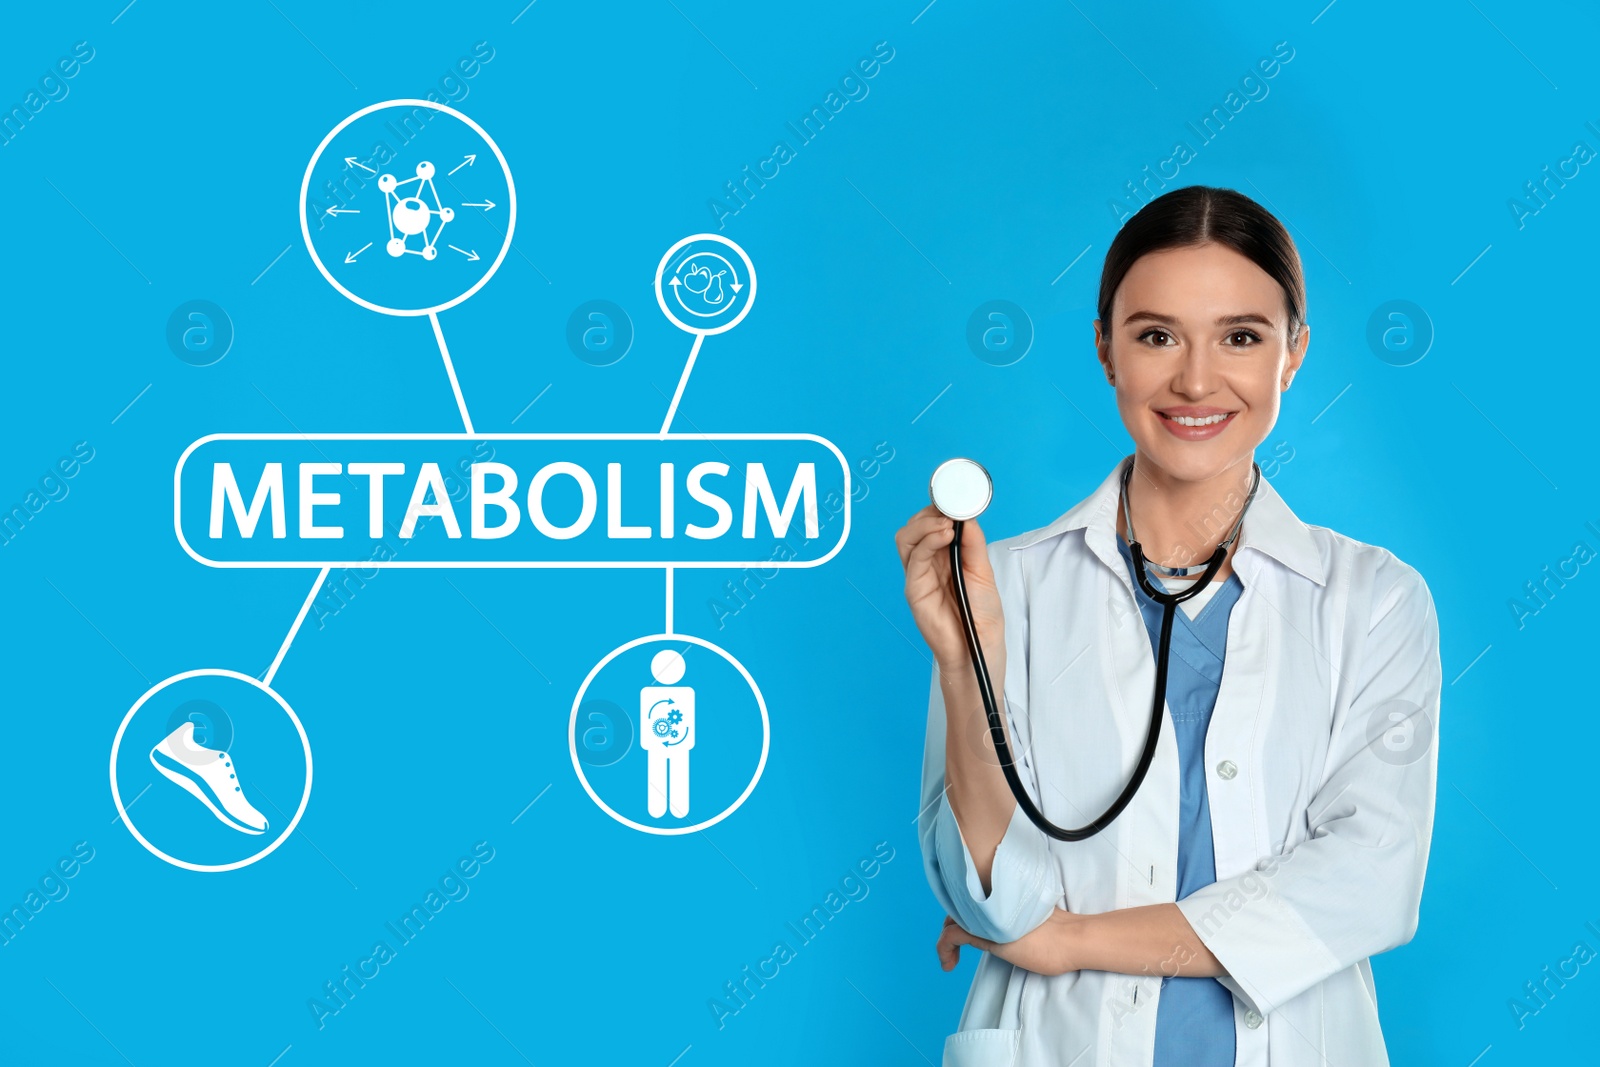 Image of Metabolism concept. Doctor with stethoscope on blue background